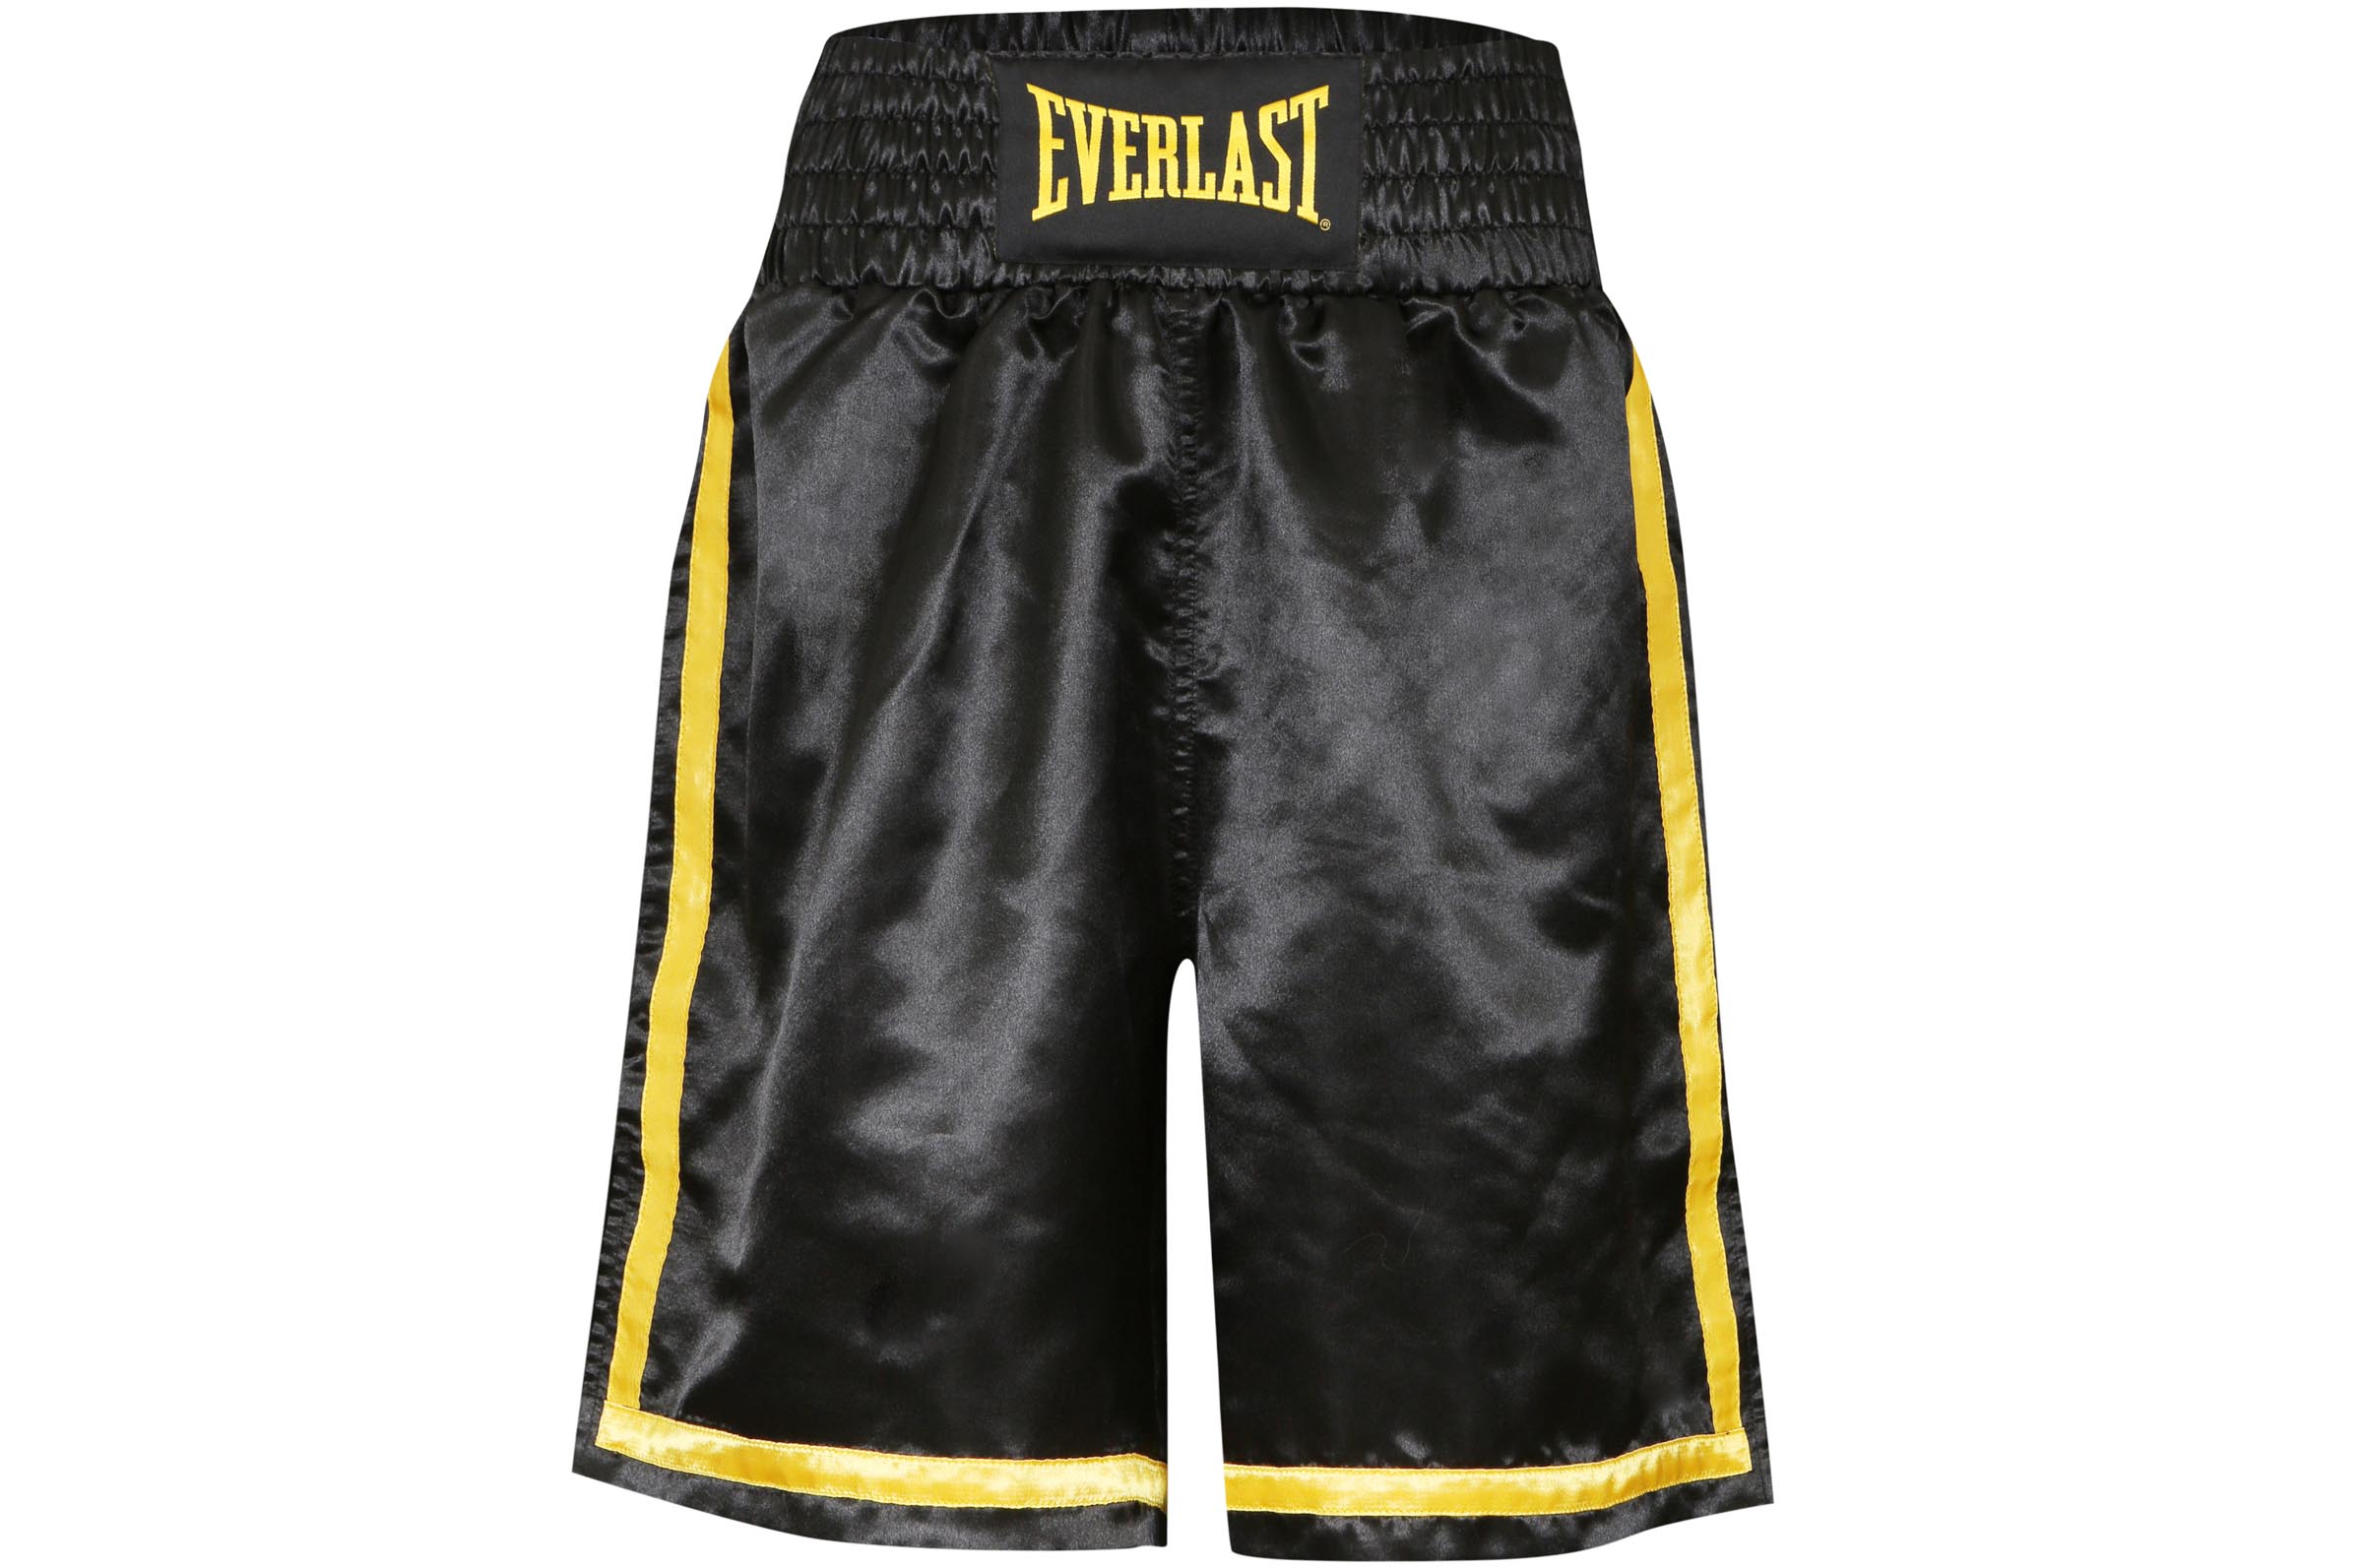 Everlast Adult Competition Boxing Shorts 